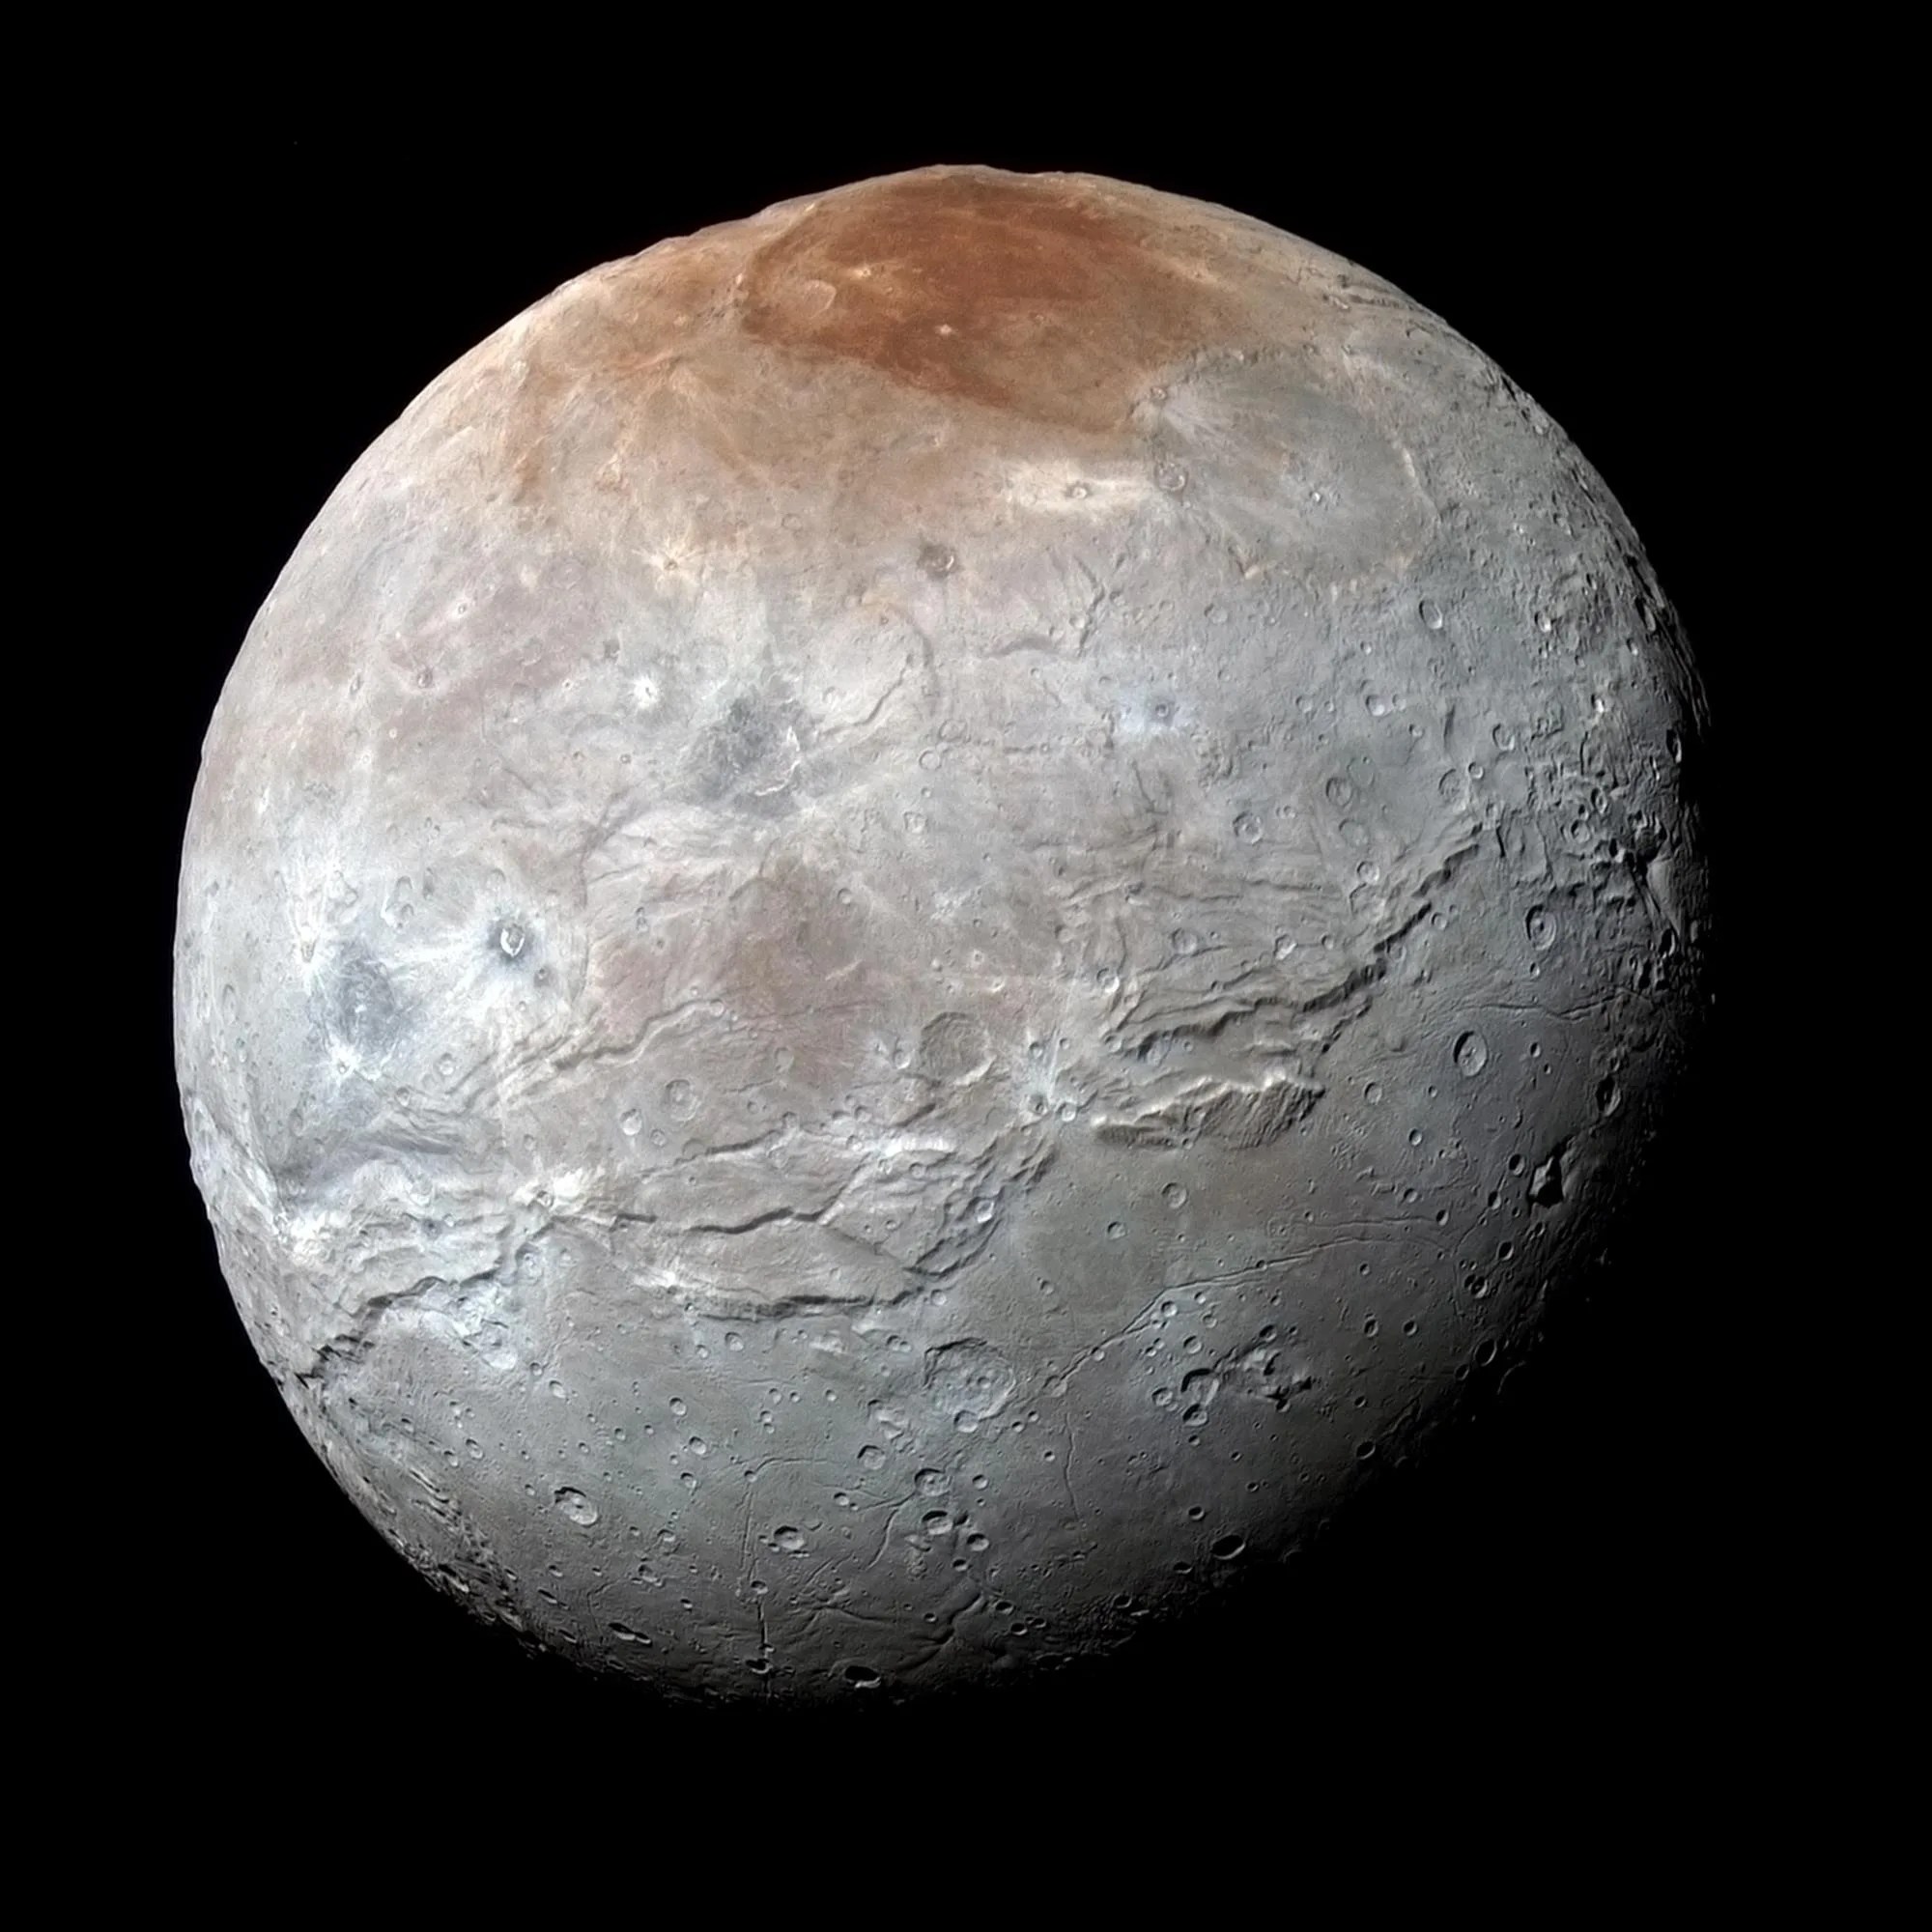 A full globe image of Pluto's moon, Charon. The moon is gray with a reddish spot at the top in this image.